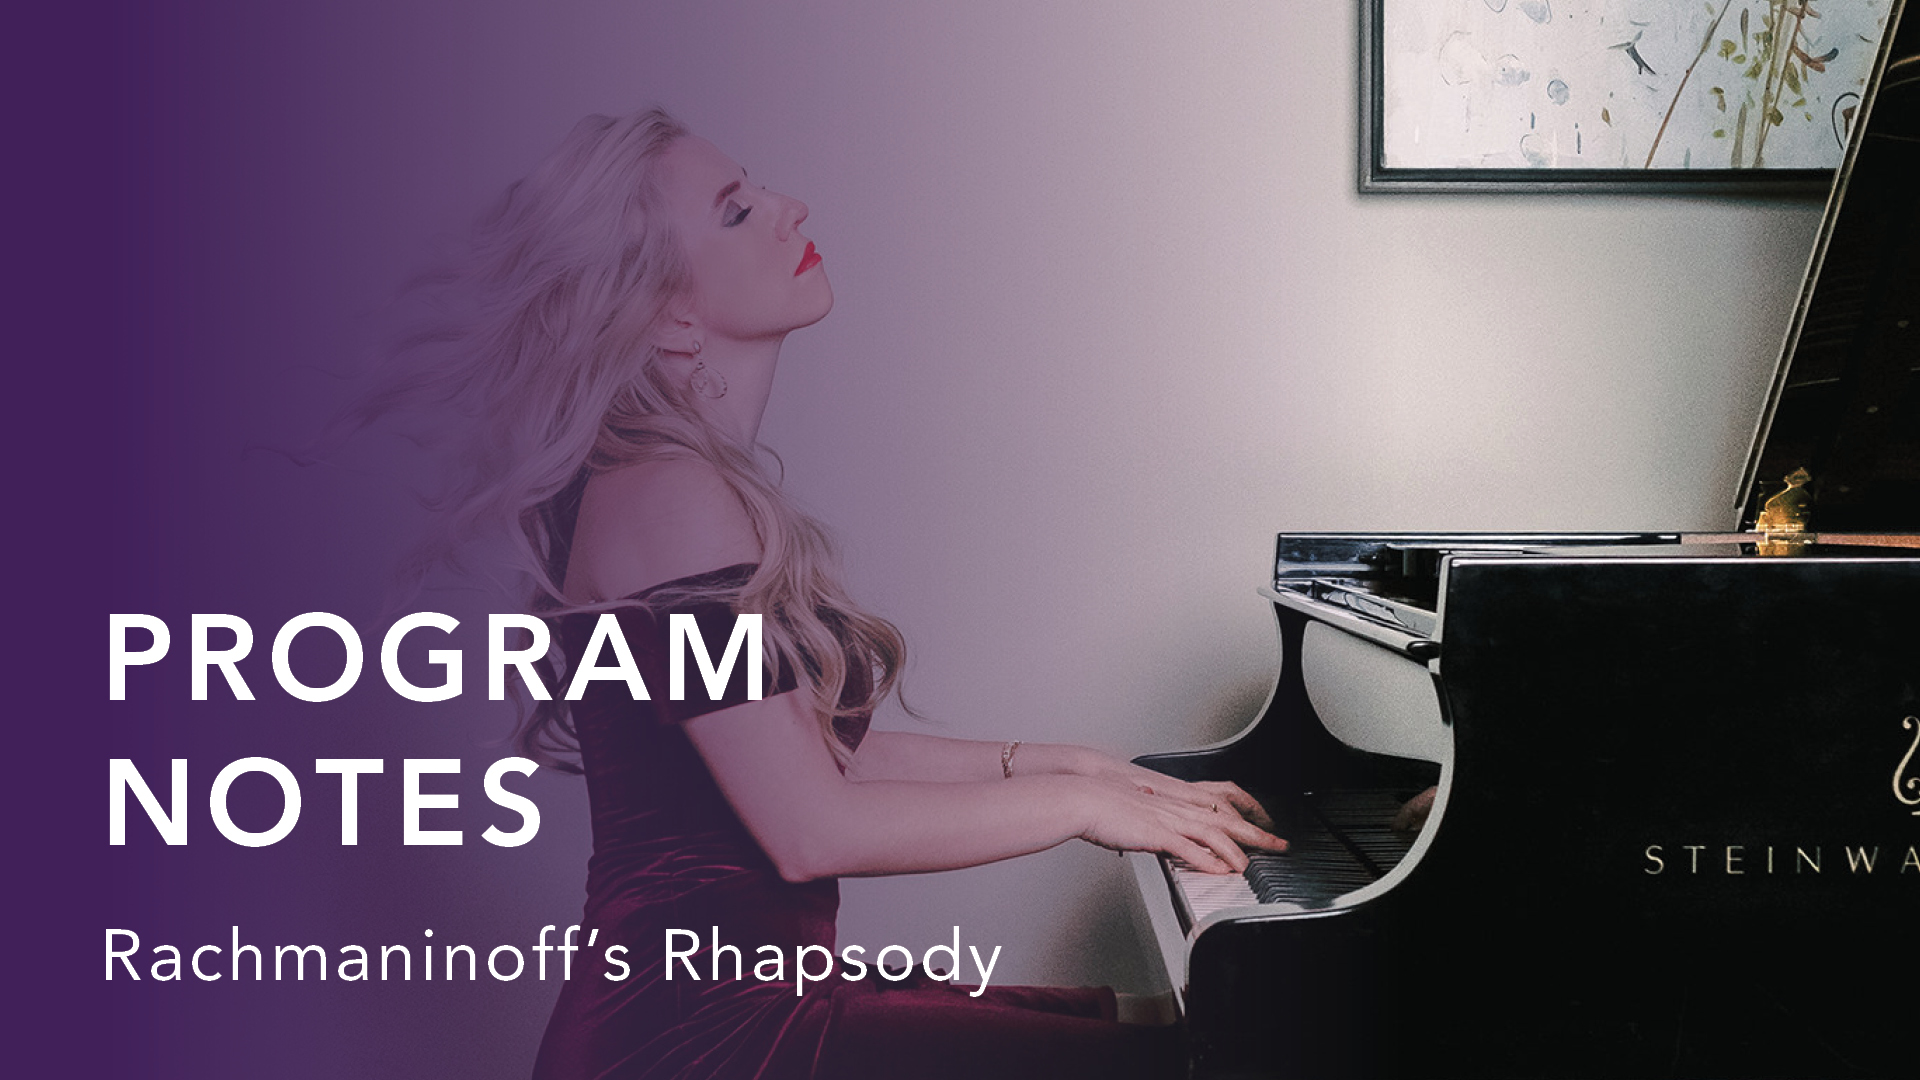 Featured image for “Program Notes: Rachmaninoff’s Rhapsody”